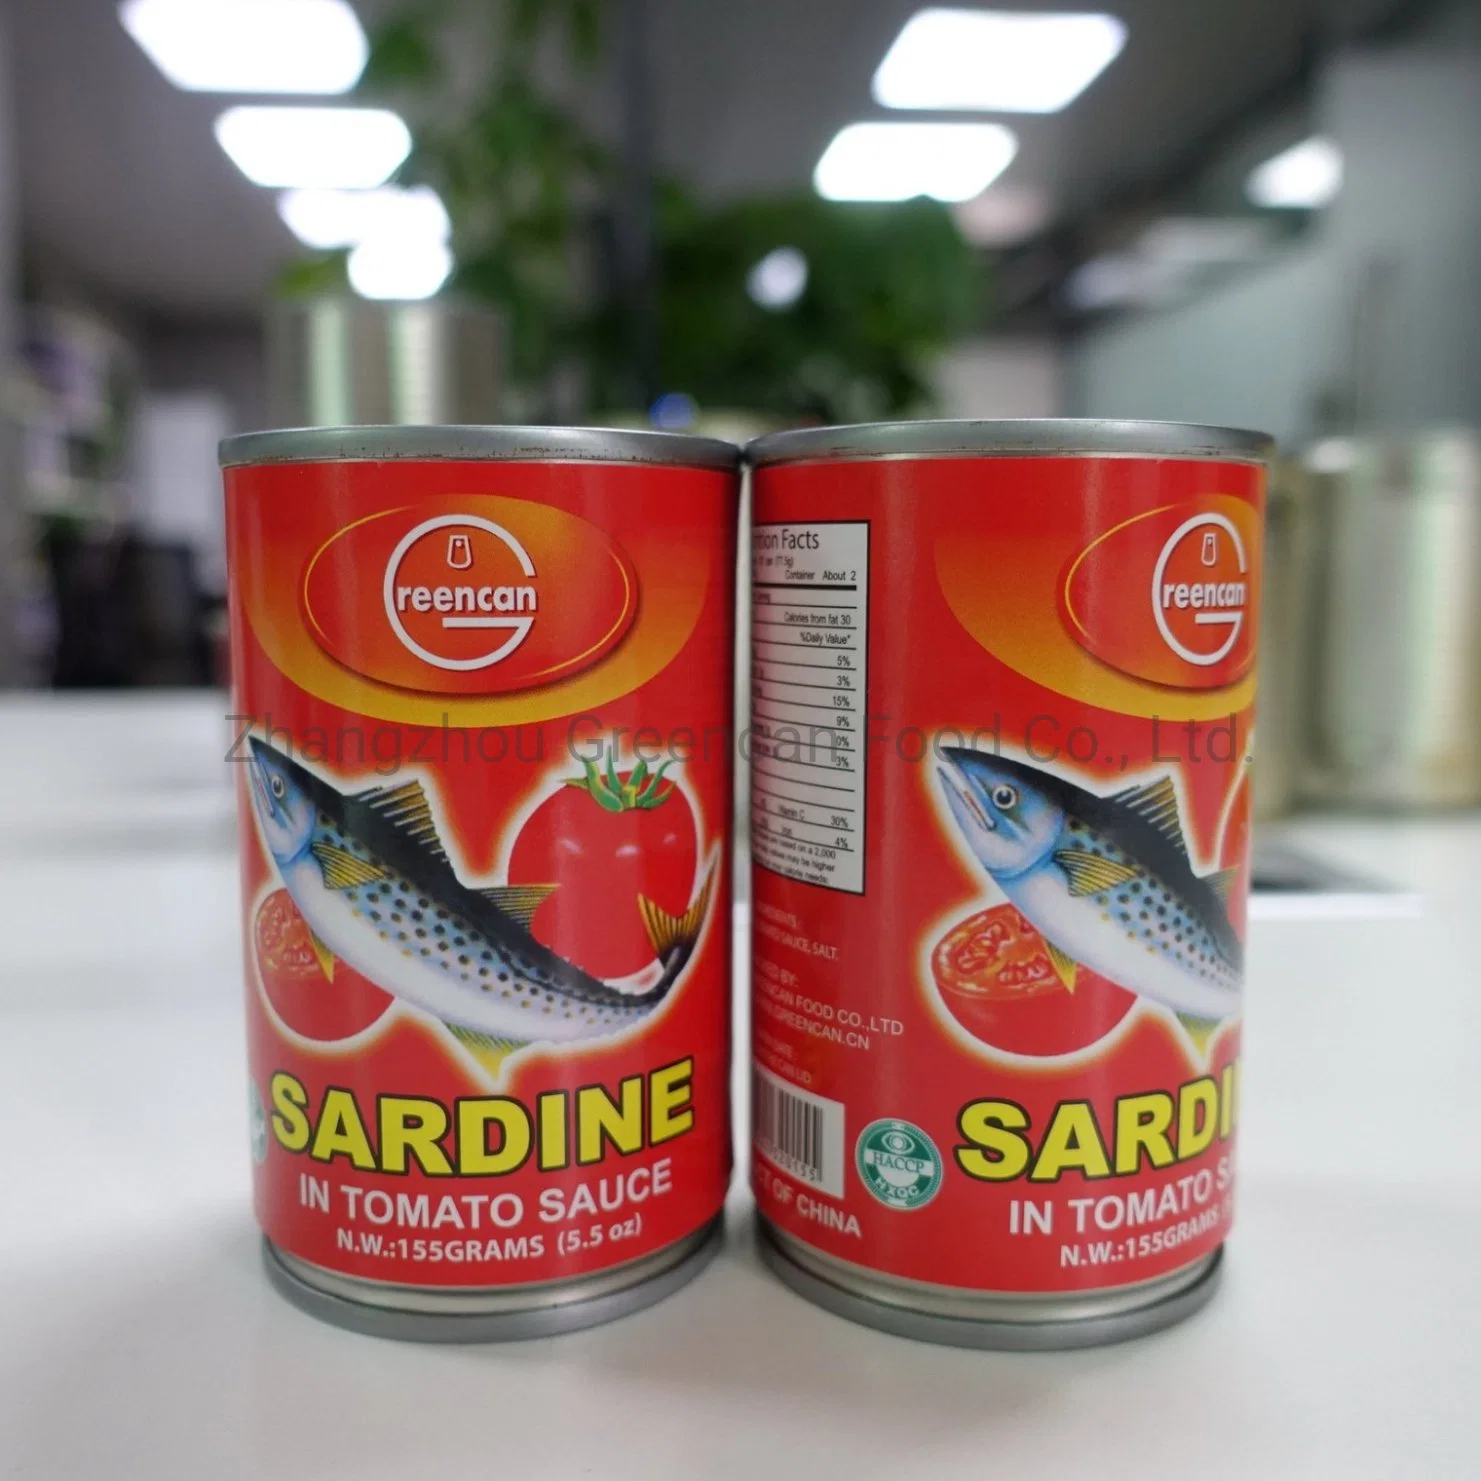 Original Factory Canned Fish Canned Sardines in Tomato Sauce